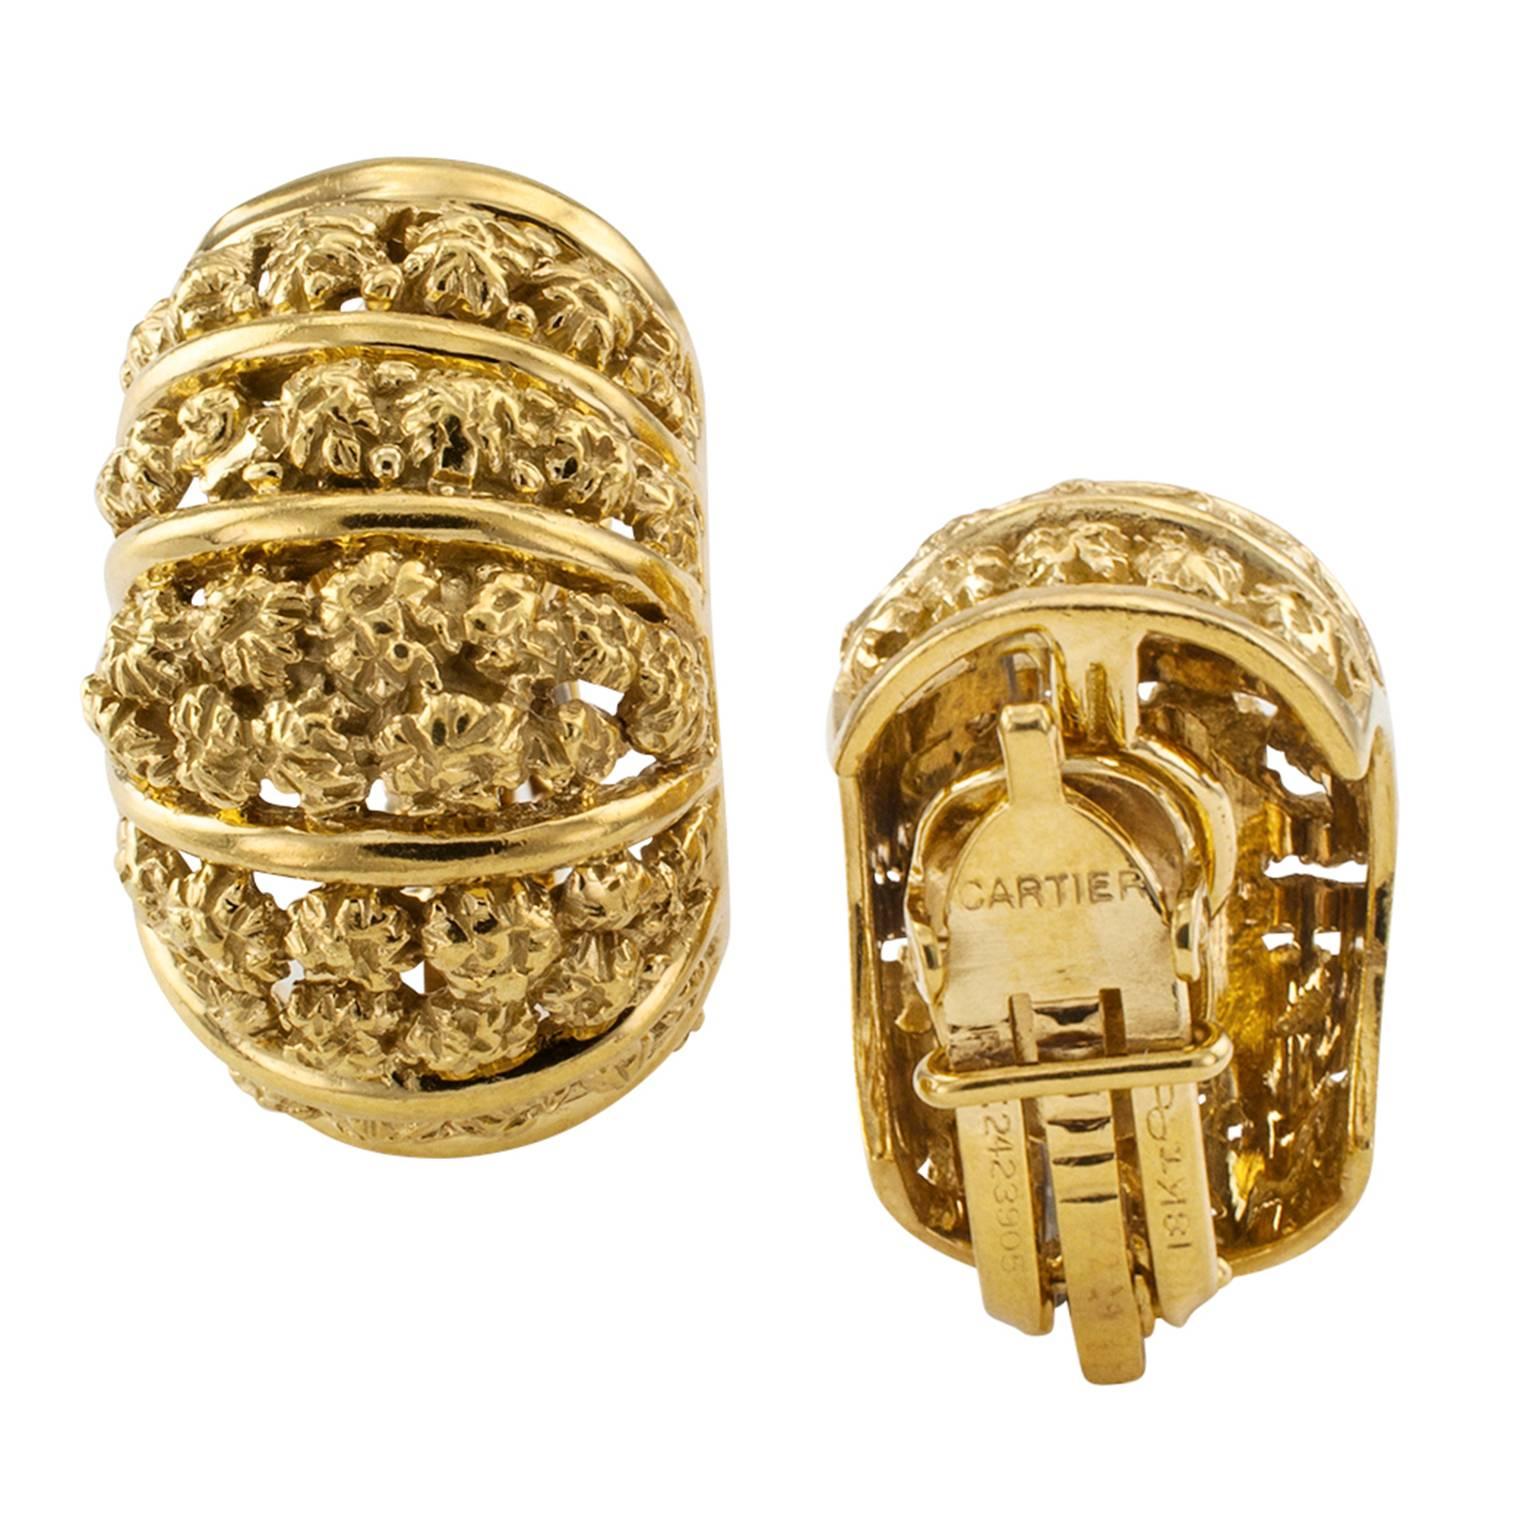 Cartier Estate Clip-On Gold Earrings 

Very classy and rich 18 karat yellow gold half hoop designs embellished with small flower like matte gold nuggets within a frame comprising arched bright polish gold bars.  Clip backs, signed Cartier,